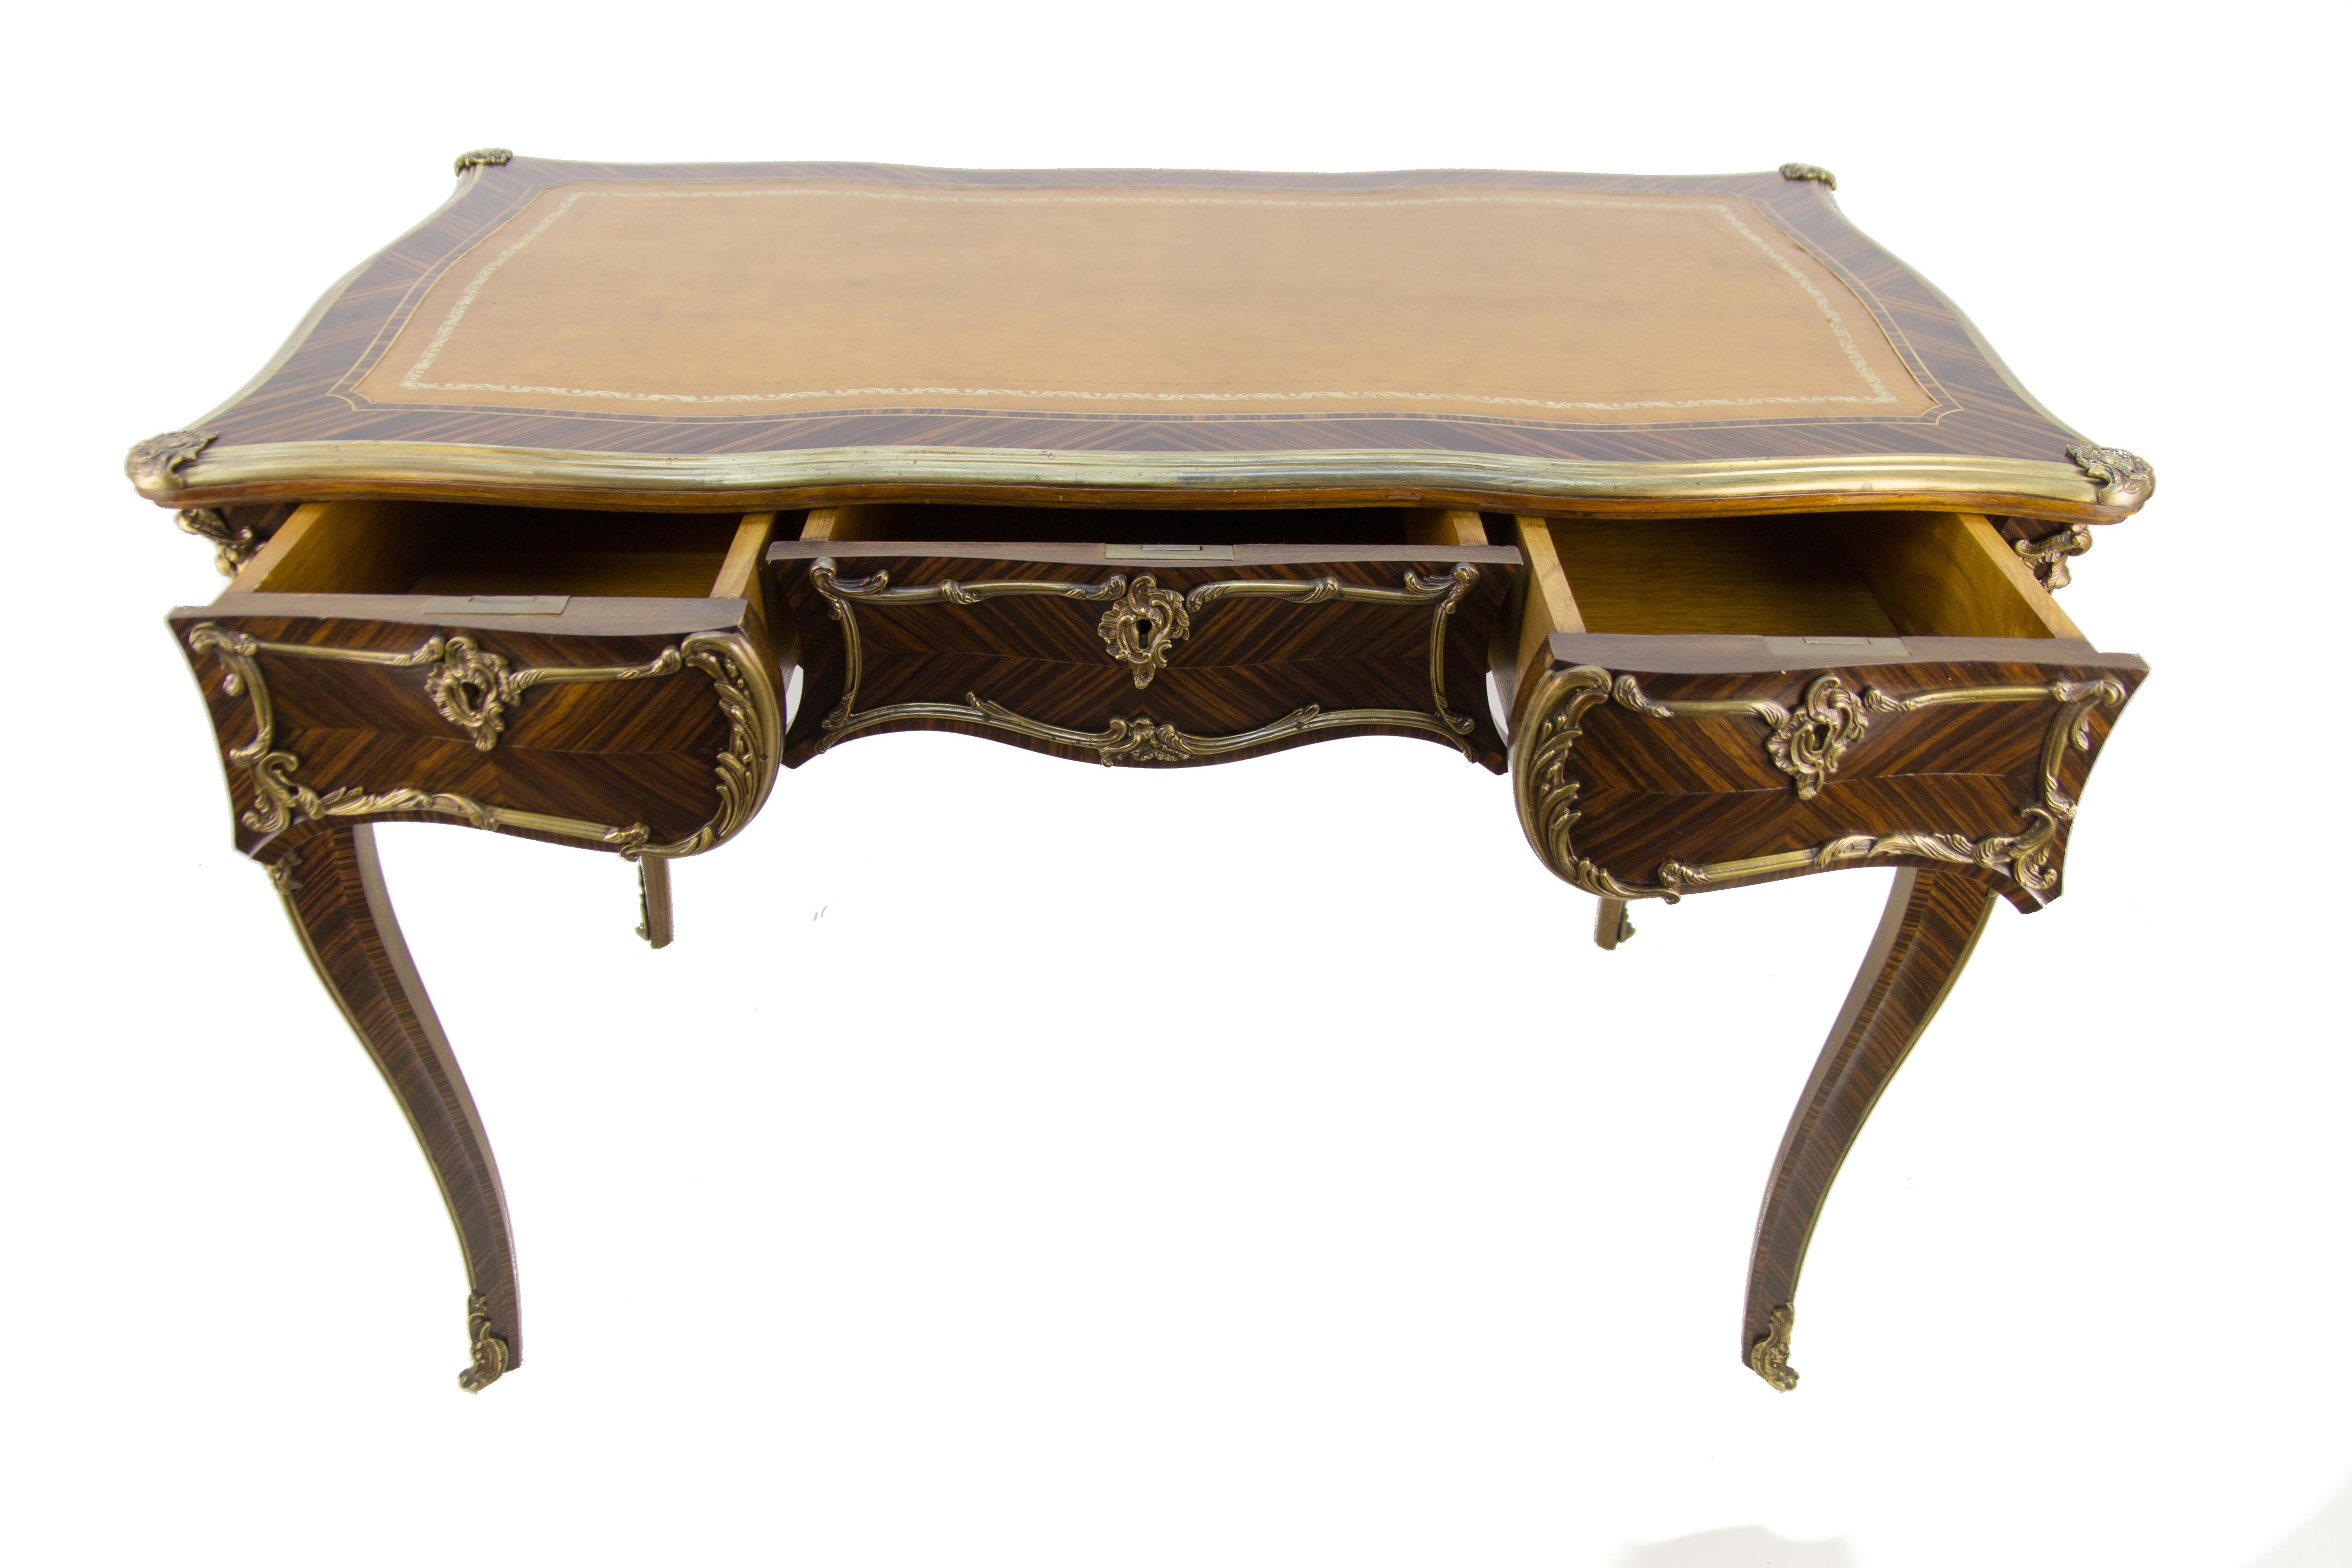 This fine Louis XV-style desk has a leather top framed by bronze borders. The writing desk is raised on cabriole legs headed by floral and leaf cast mounts that have finely finished walnut veneer on all sides. The desk is fitted with three drawers